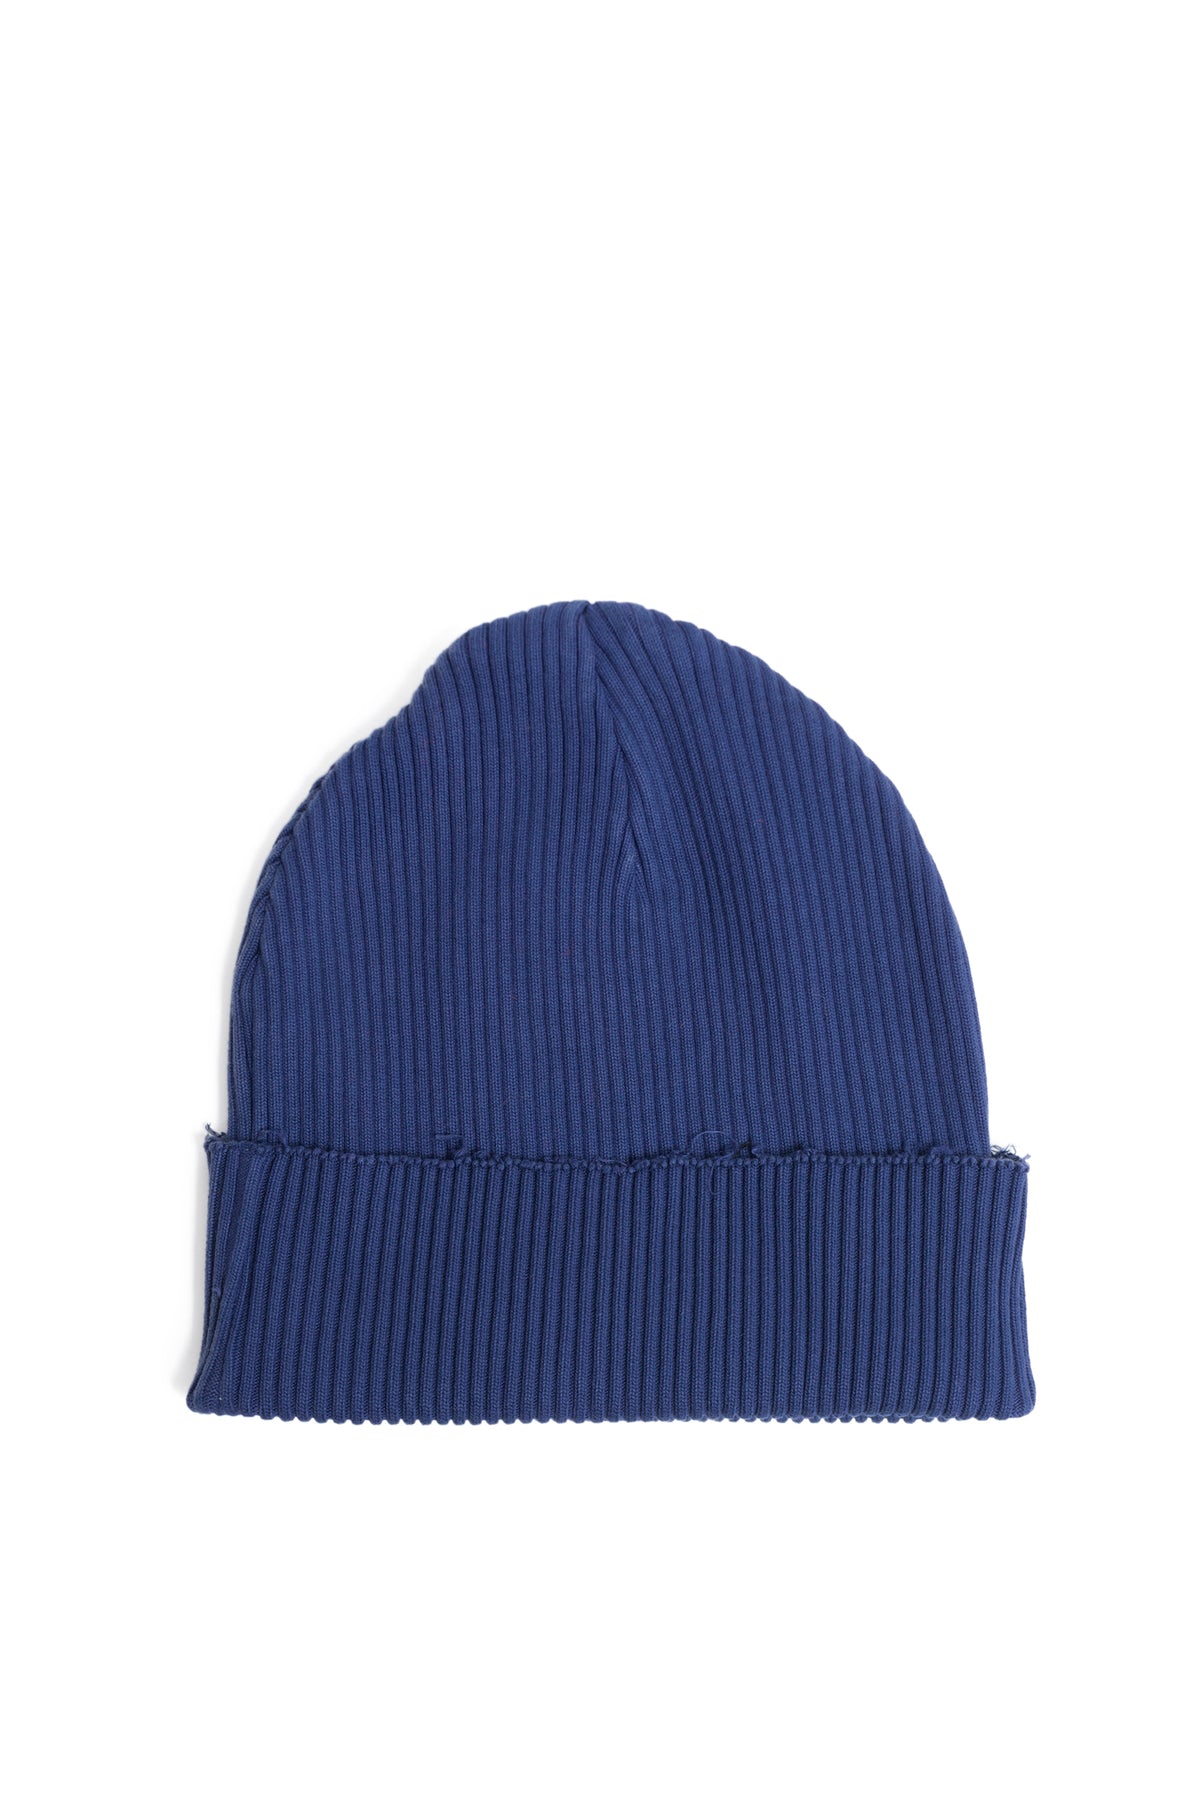 Perfect ribs RIB BEANIE CAP "SMILE PATCH" / NVY